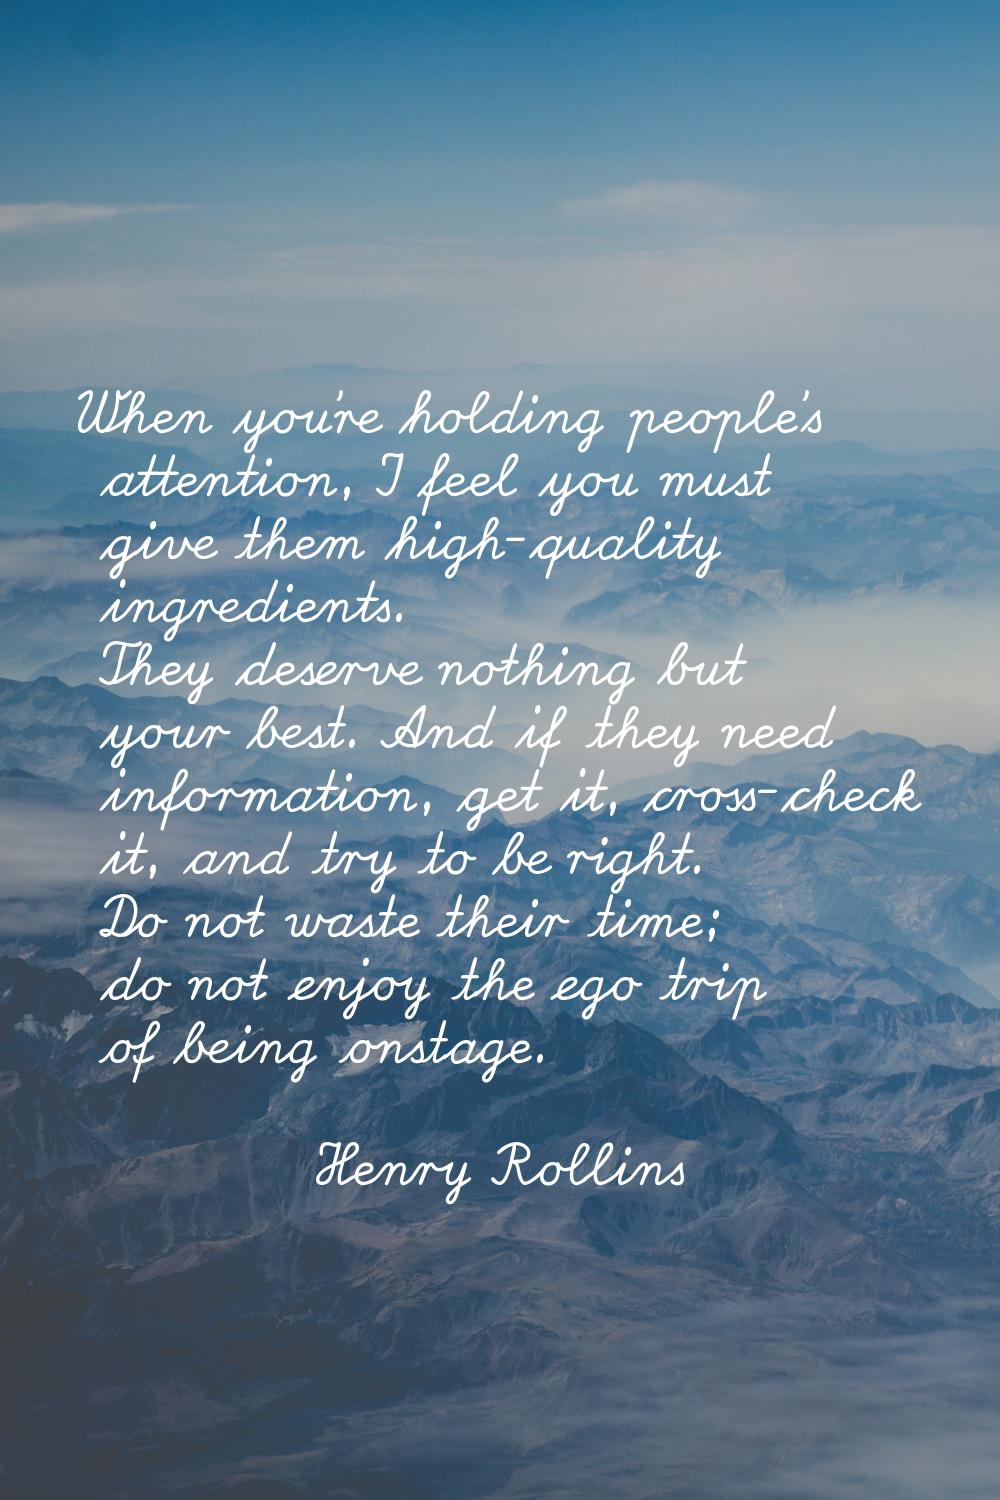 When you're holding people's attention, I feel you must give them high-quality ingredients. They de